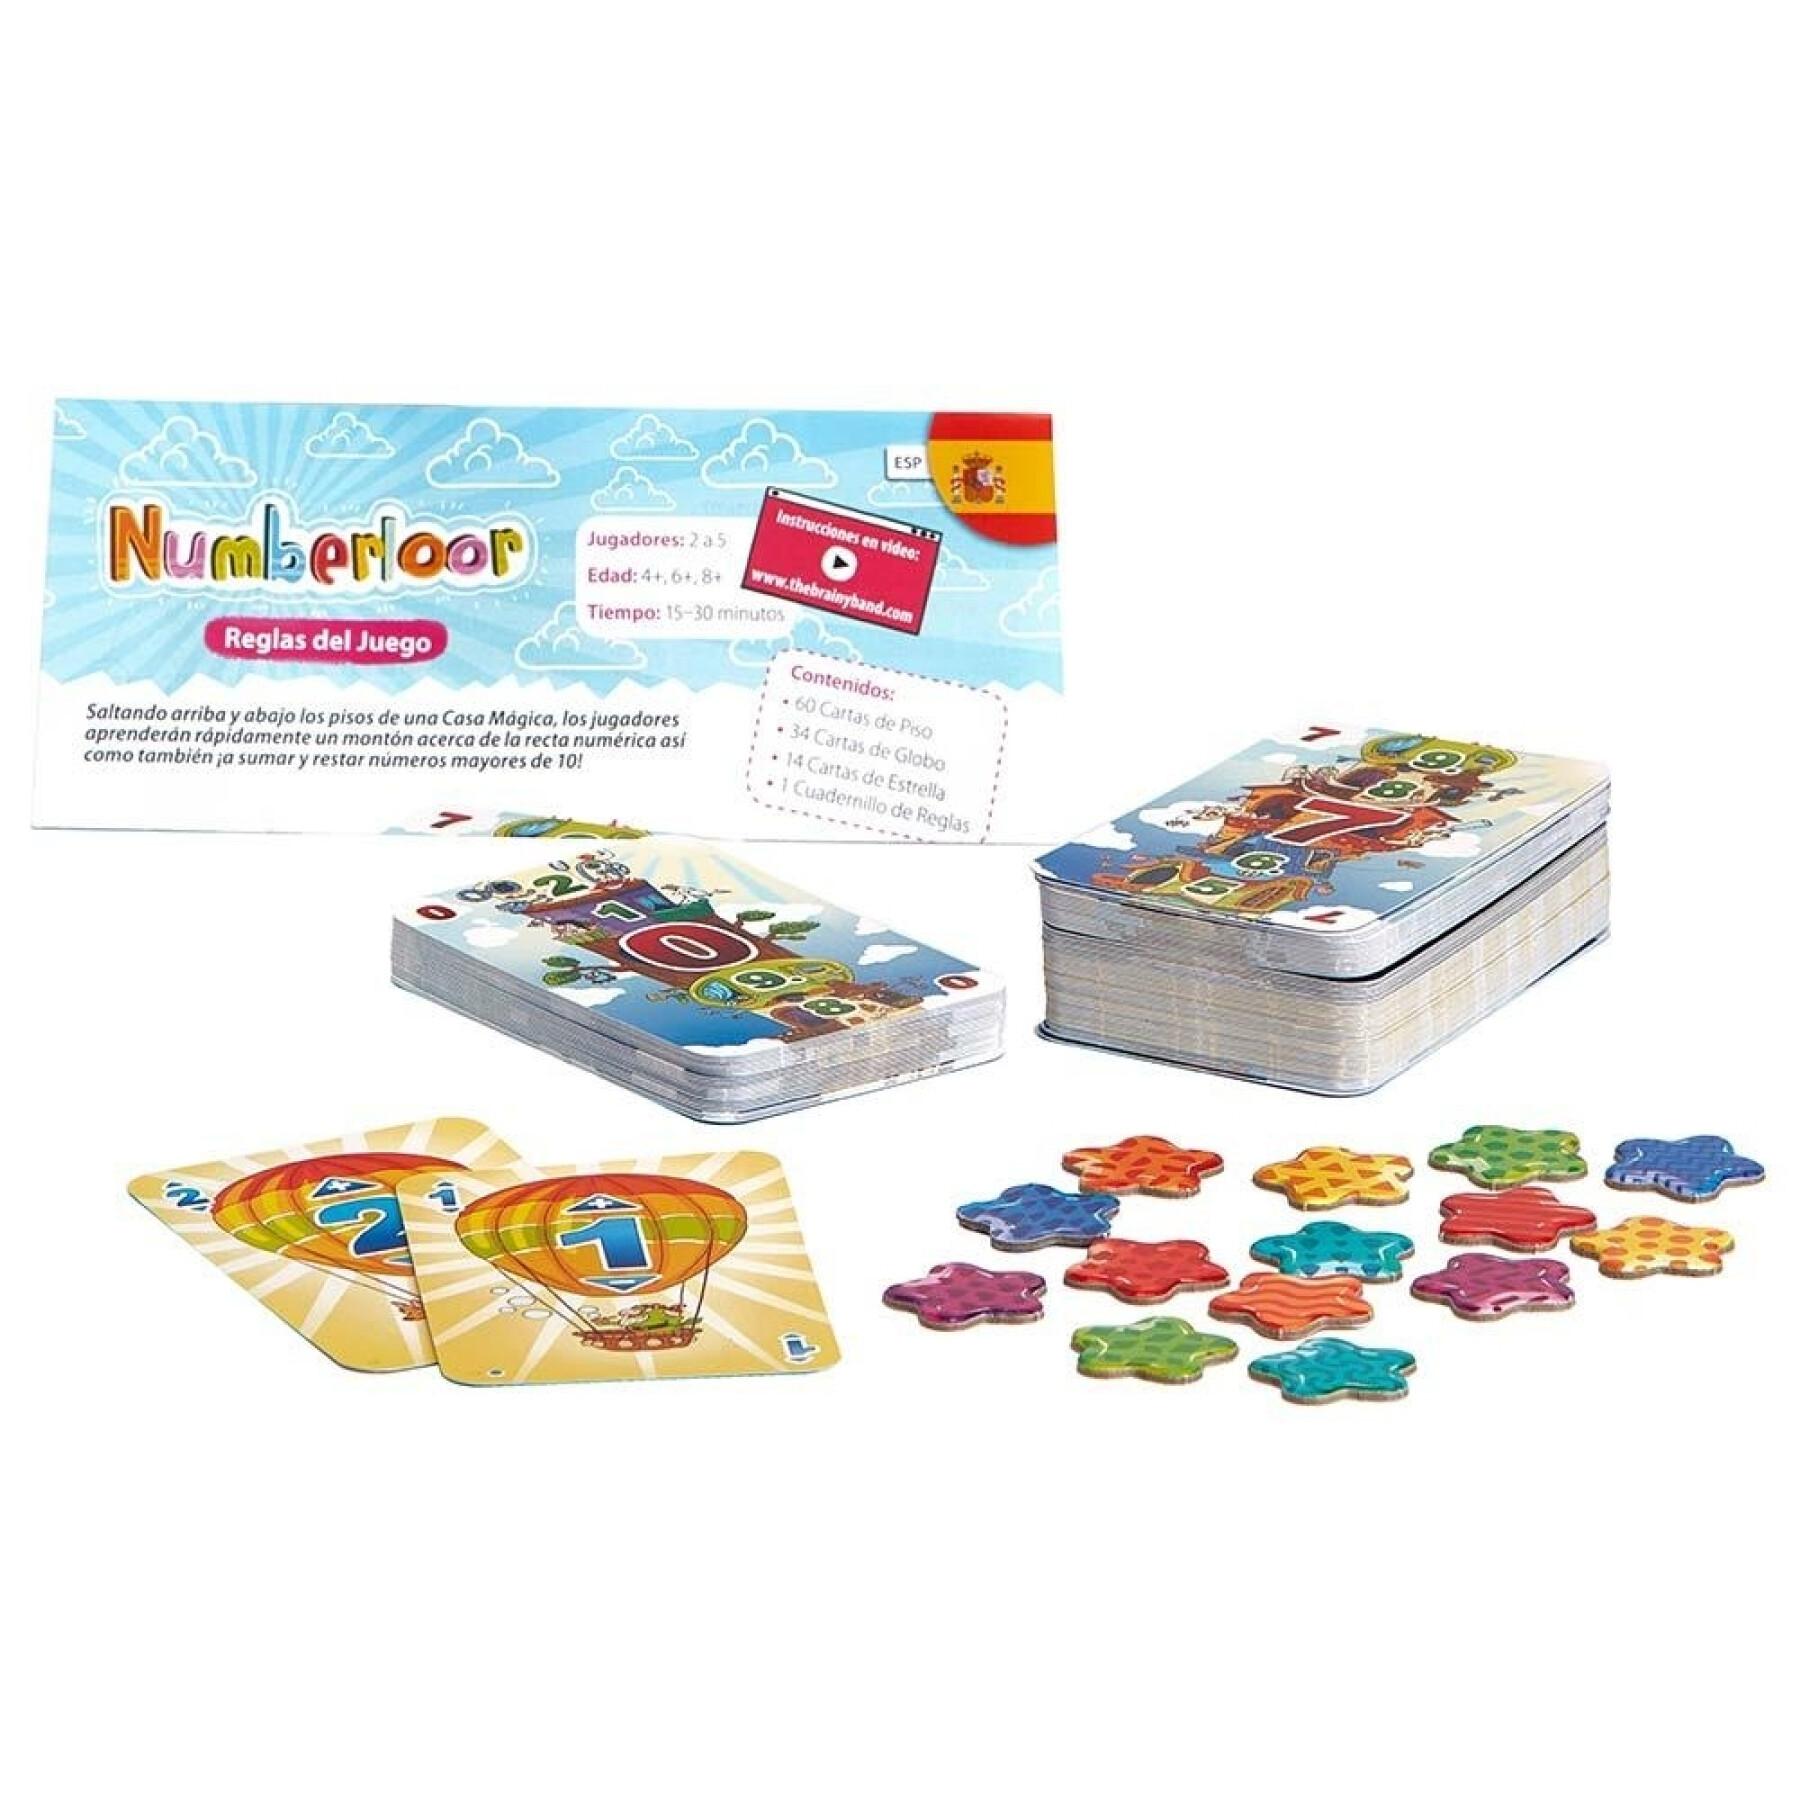 Educational addition and subtraction number games Falomir